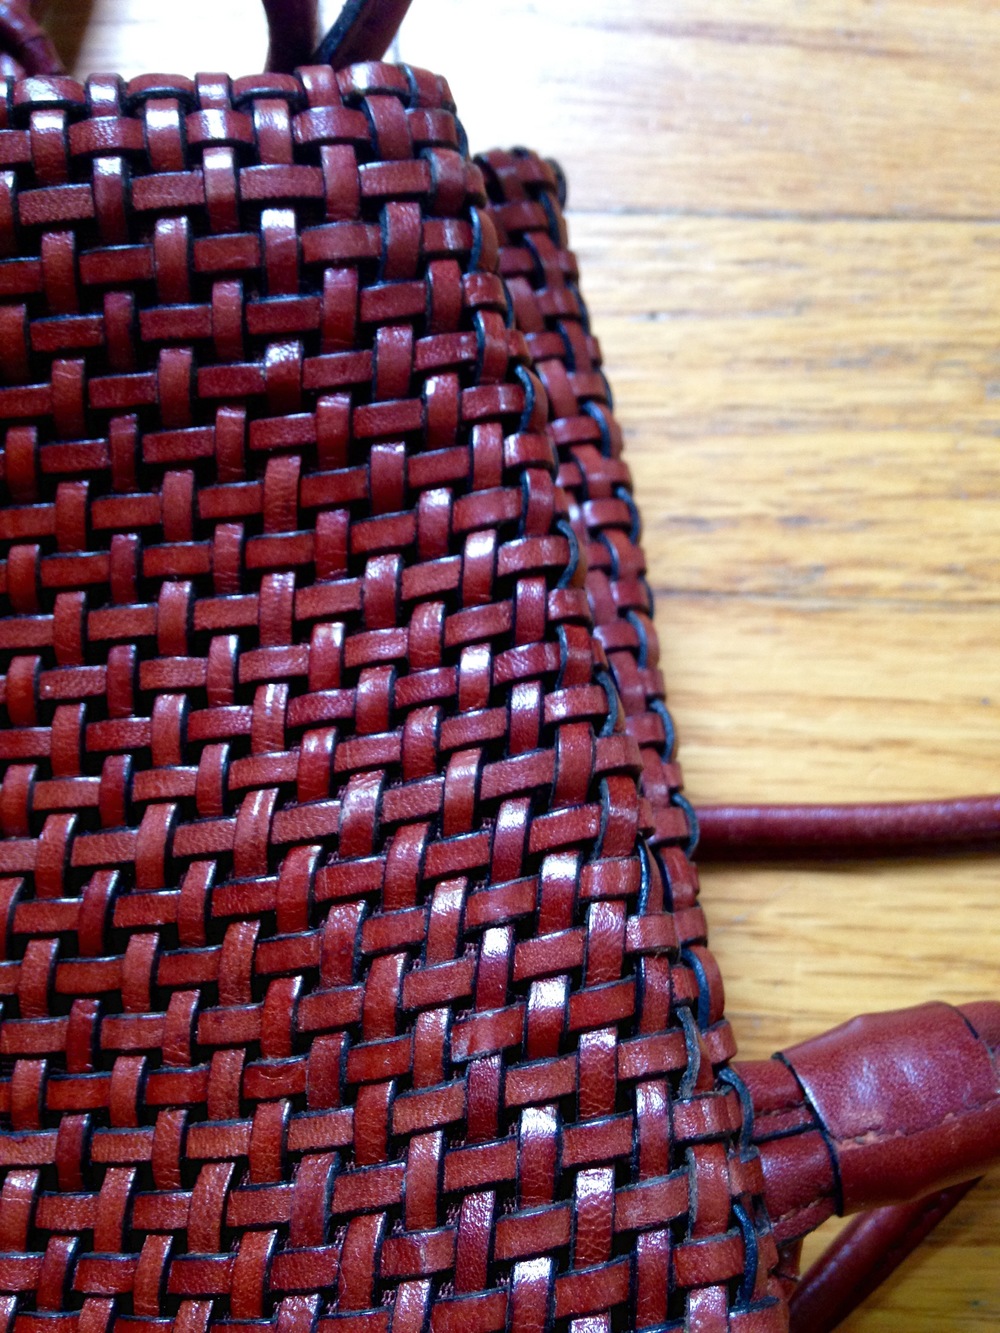 retro brown leather woven backpack $120 - bags and purses - bright